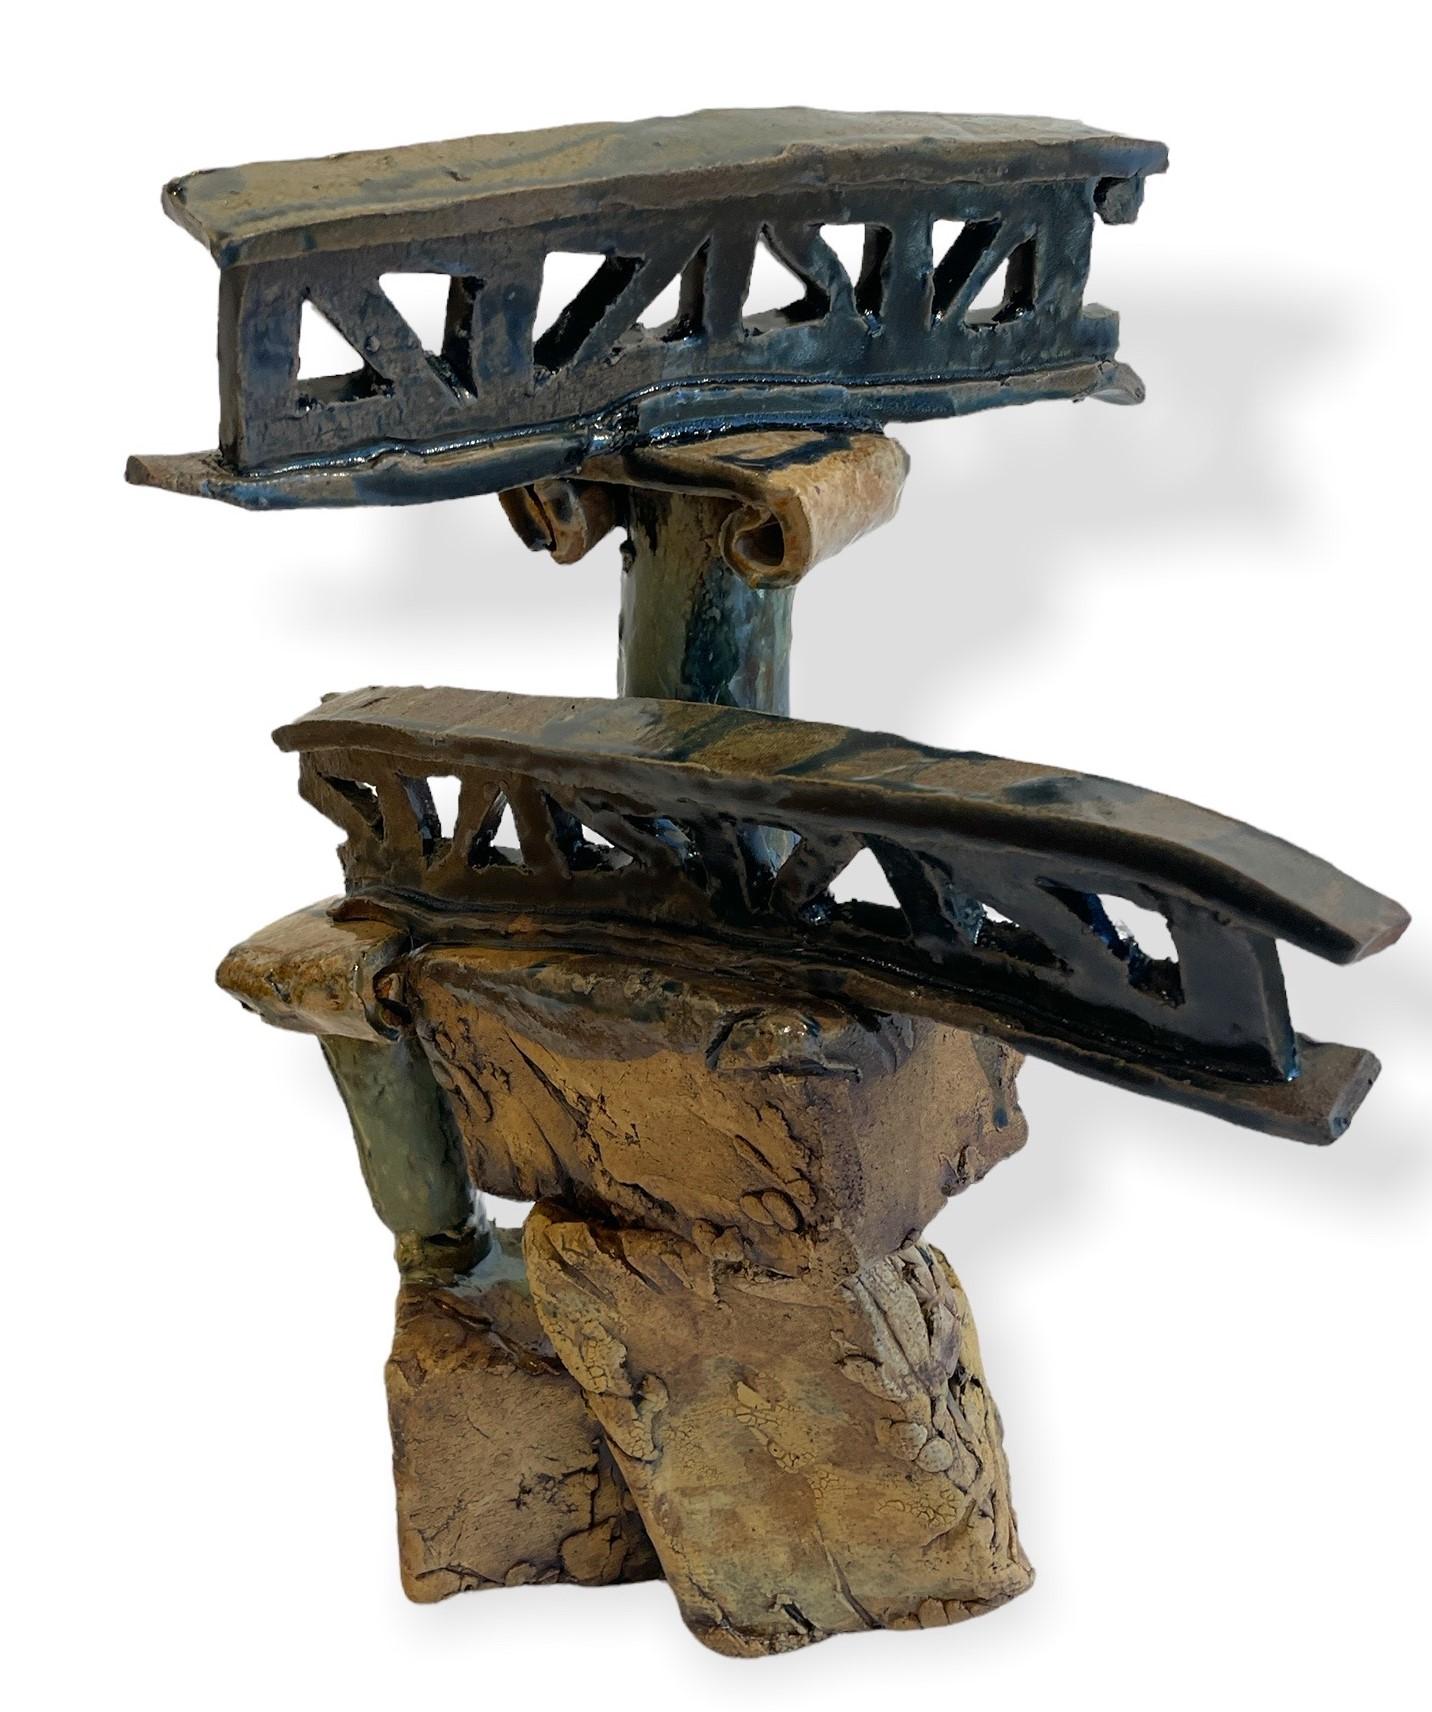 Bridge girders are suspended precariously atop Ionic columns in this chunky, hand built sculpture. Its earthenware coloring is complemented by the green, grey and blue drip glazes.

Steve Banks
Sculpture (Bridge)
stoneware, glaze
Measures: 14H